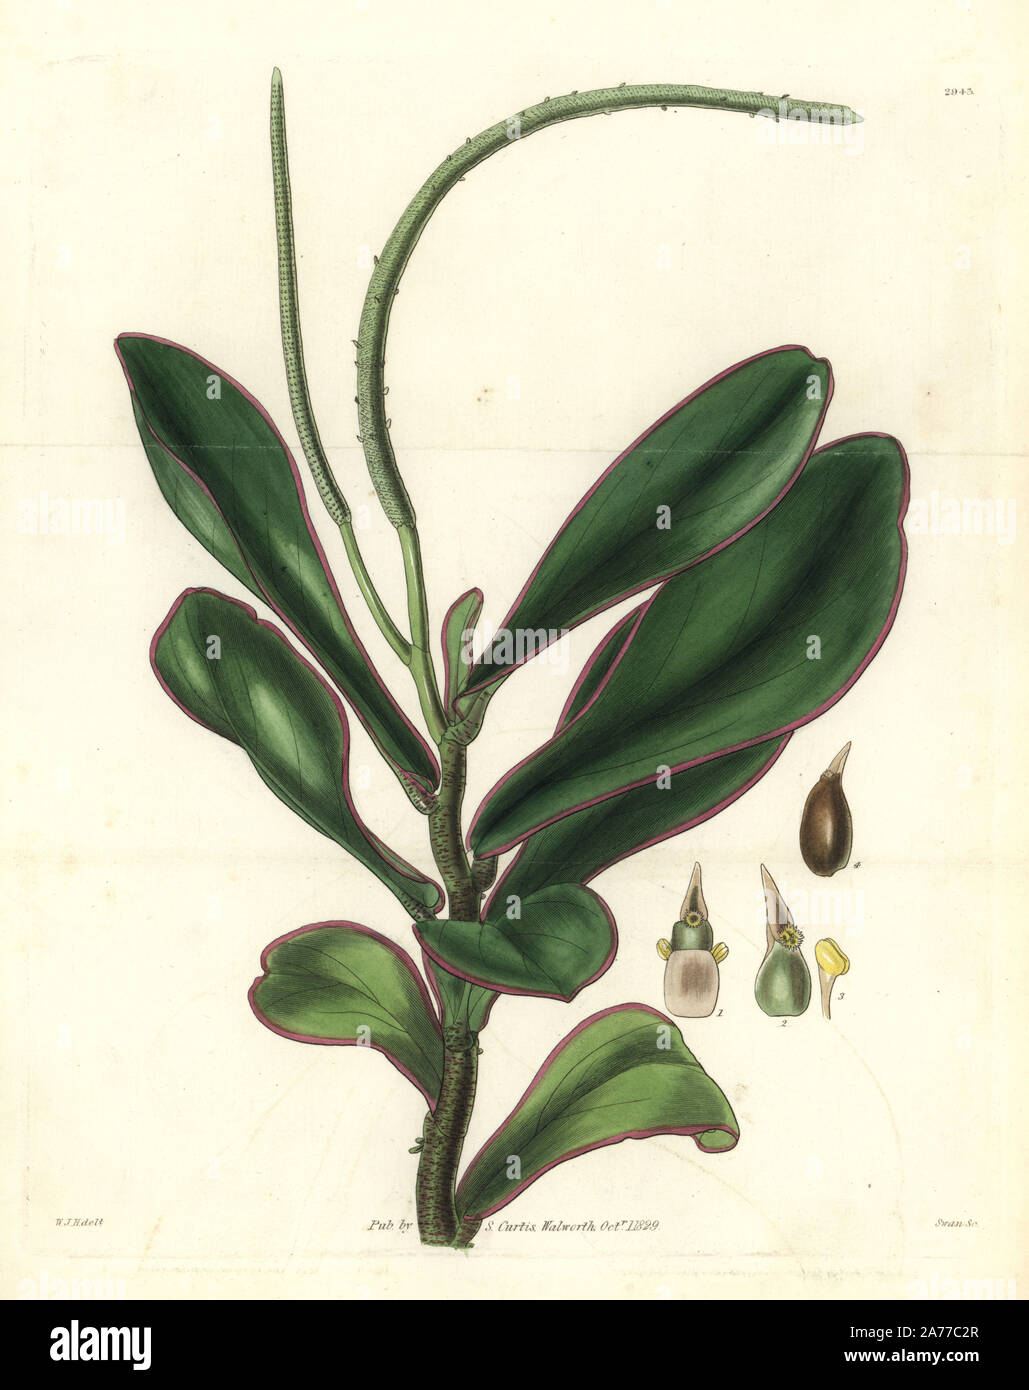 Red-edge peperomia, Peperomia clusiifolia (Clusia-leaved peperomia, Peperomia clusiaefolia). Handcoloured copperplate engraving by Swan after an illustration by William Jackson Hooker from Samuel Curtis's 'Botanical Magazine,' London, 1829. Stock Photo